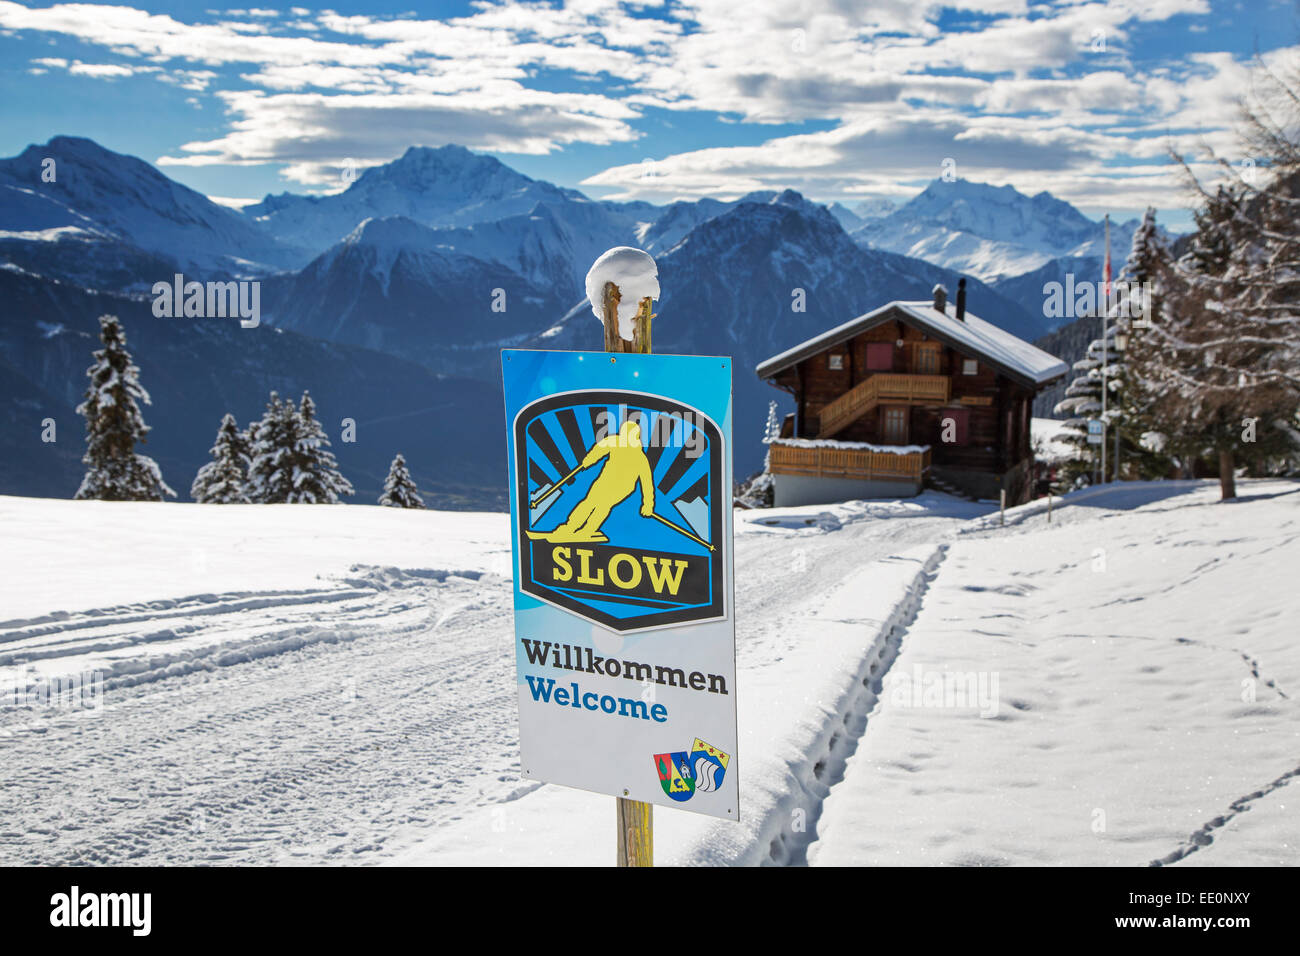 Welcome sign urging skiers to skiing slowly in Alpine ski station in the Swiss Alps in winter Stock Photo